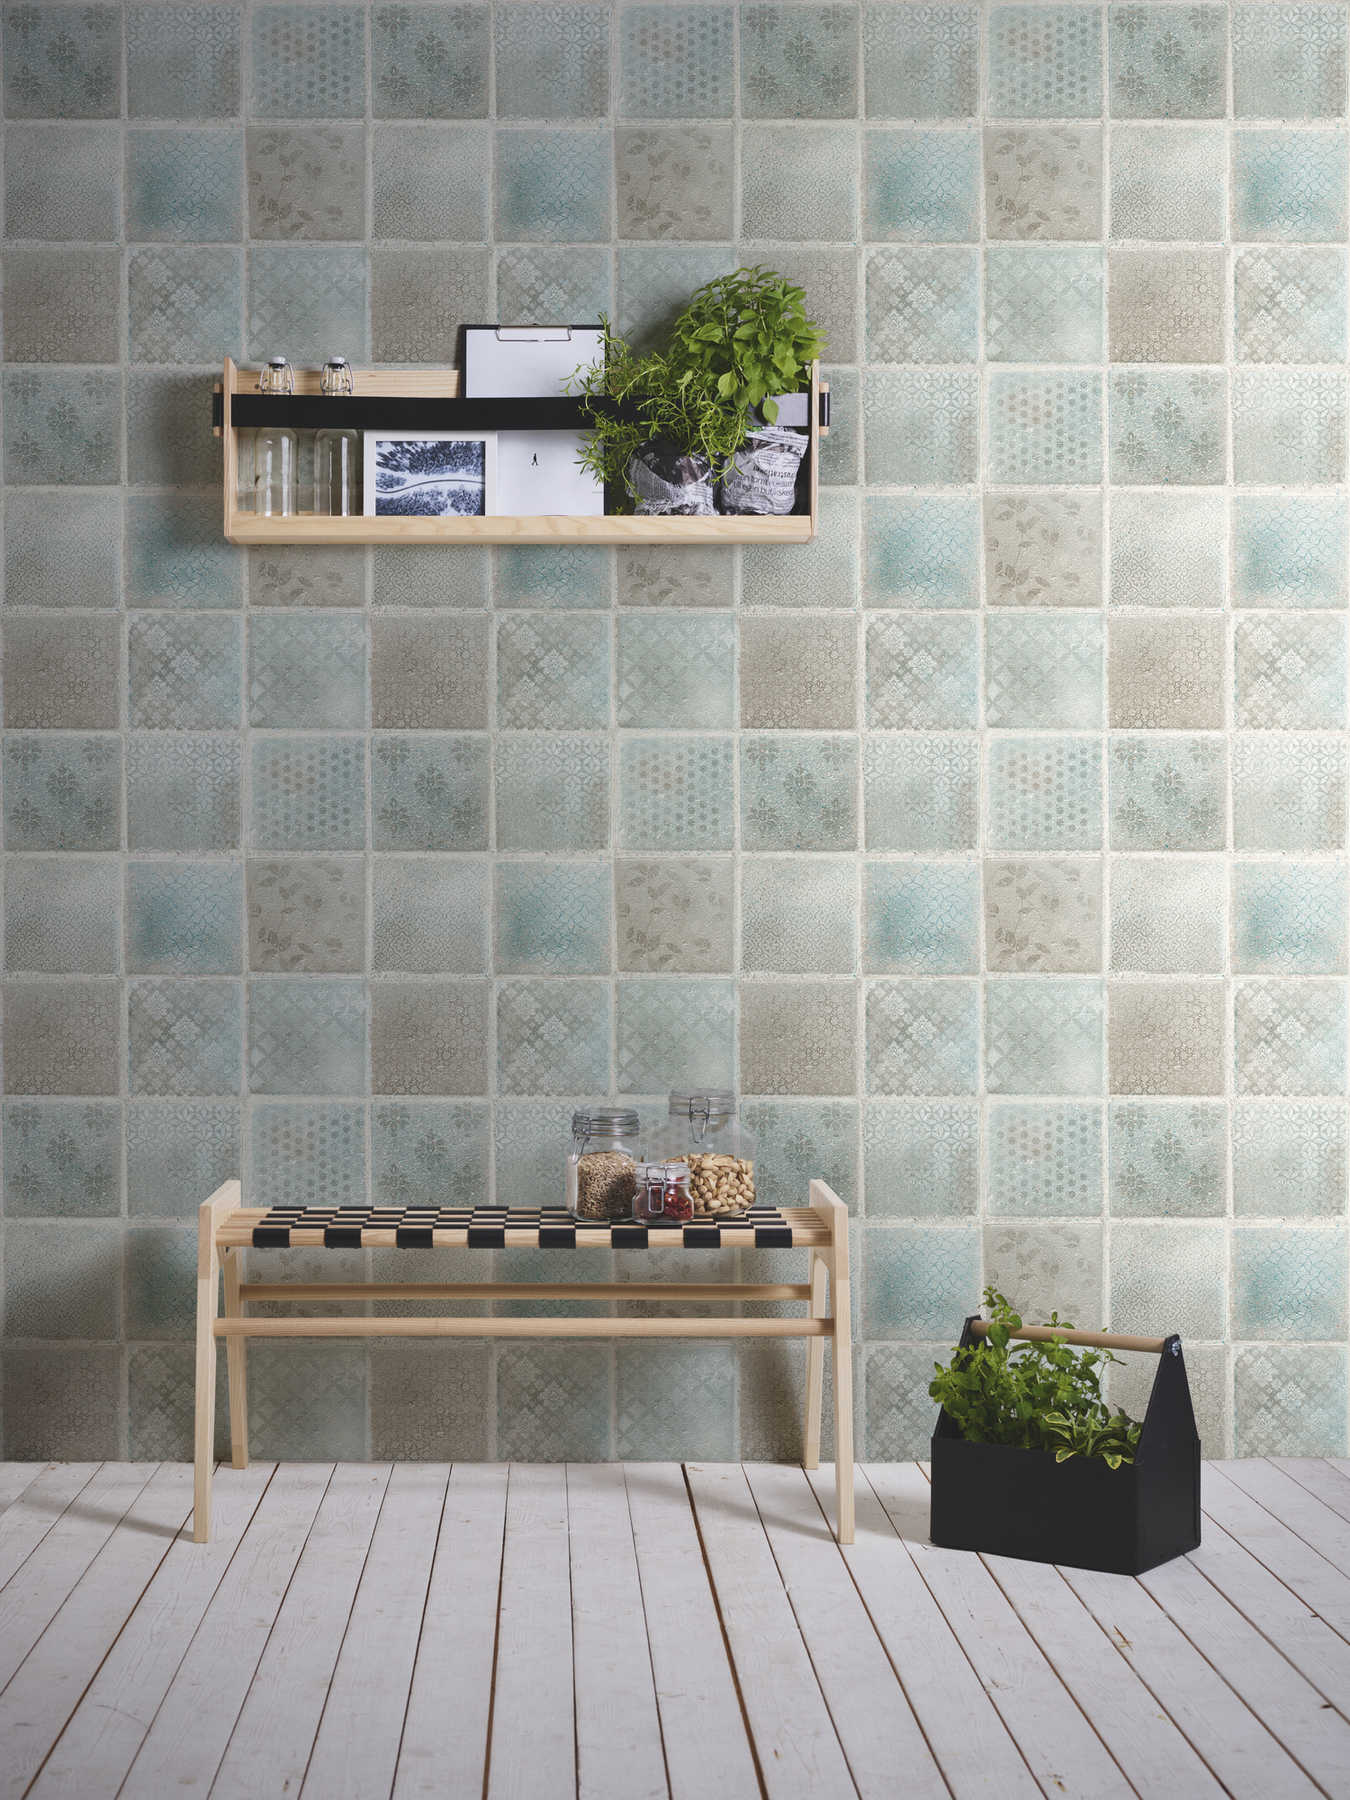             Mosaic and tile look wallpaper - blue, green, cream
        